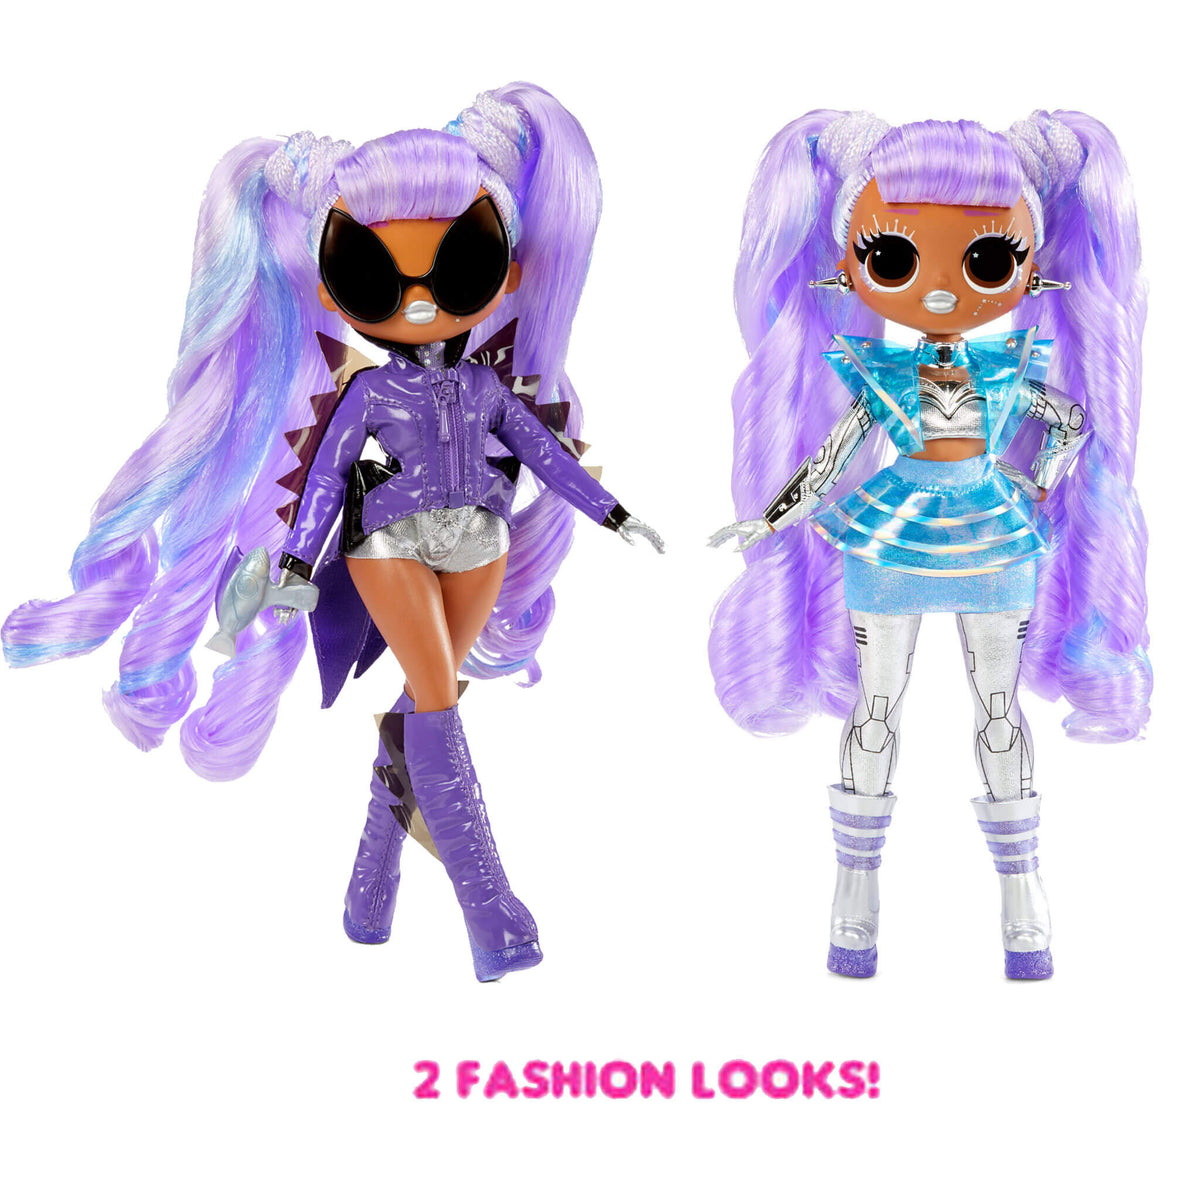 LOL Surprise OMG Movie Magic Gamma Babe Fashion Doll with 25 Surprises